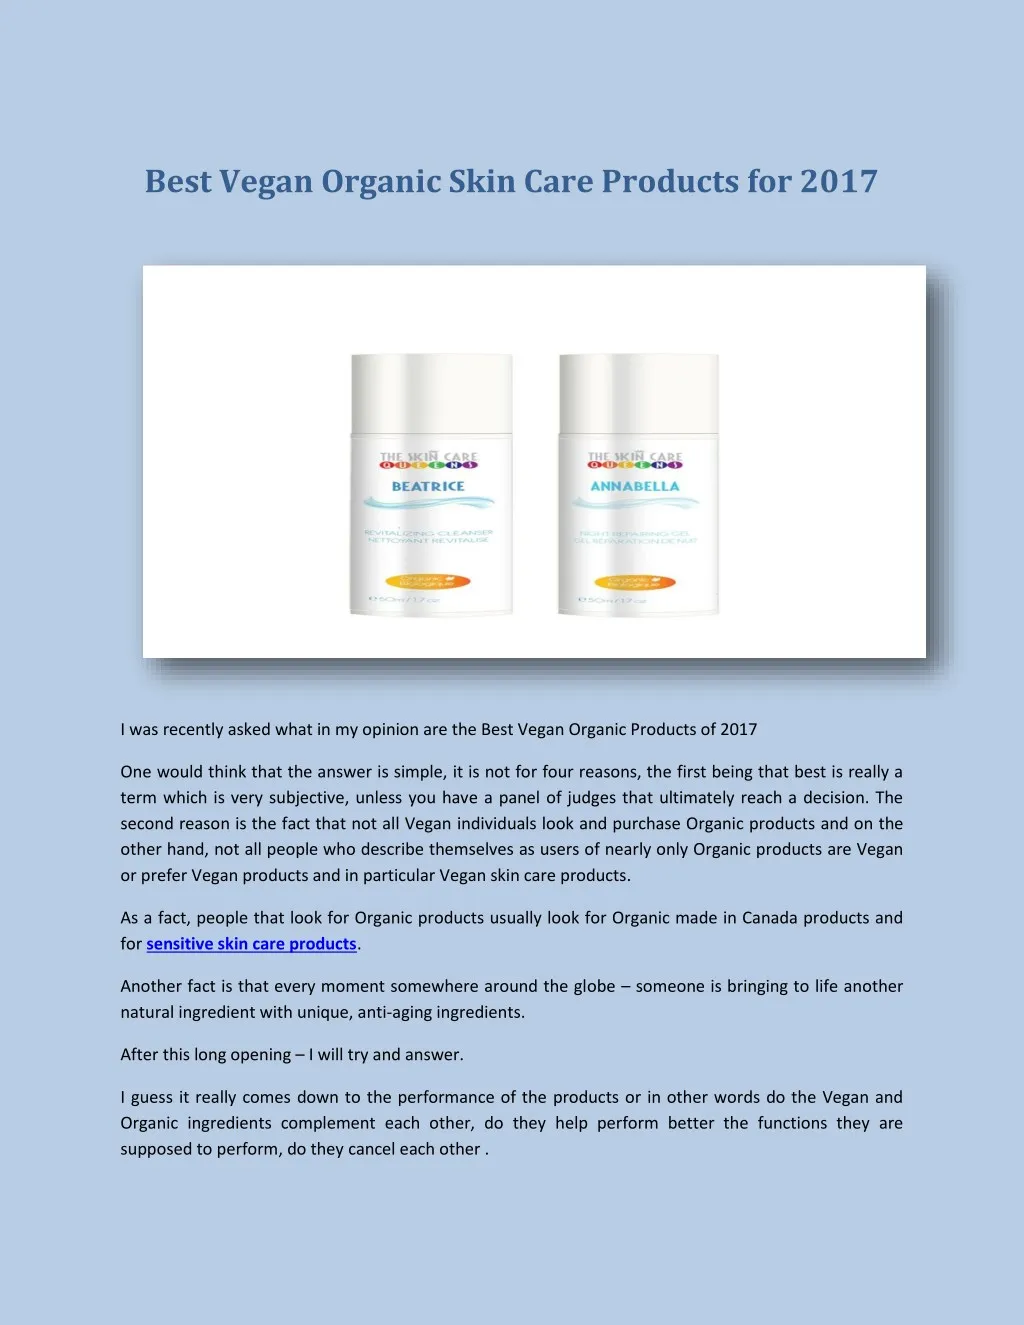 best vegan organic skin care products for 2017